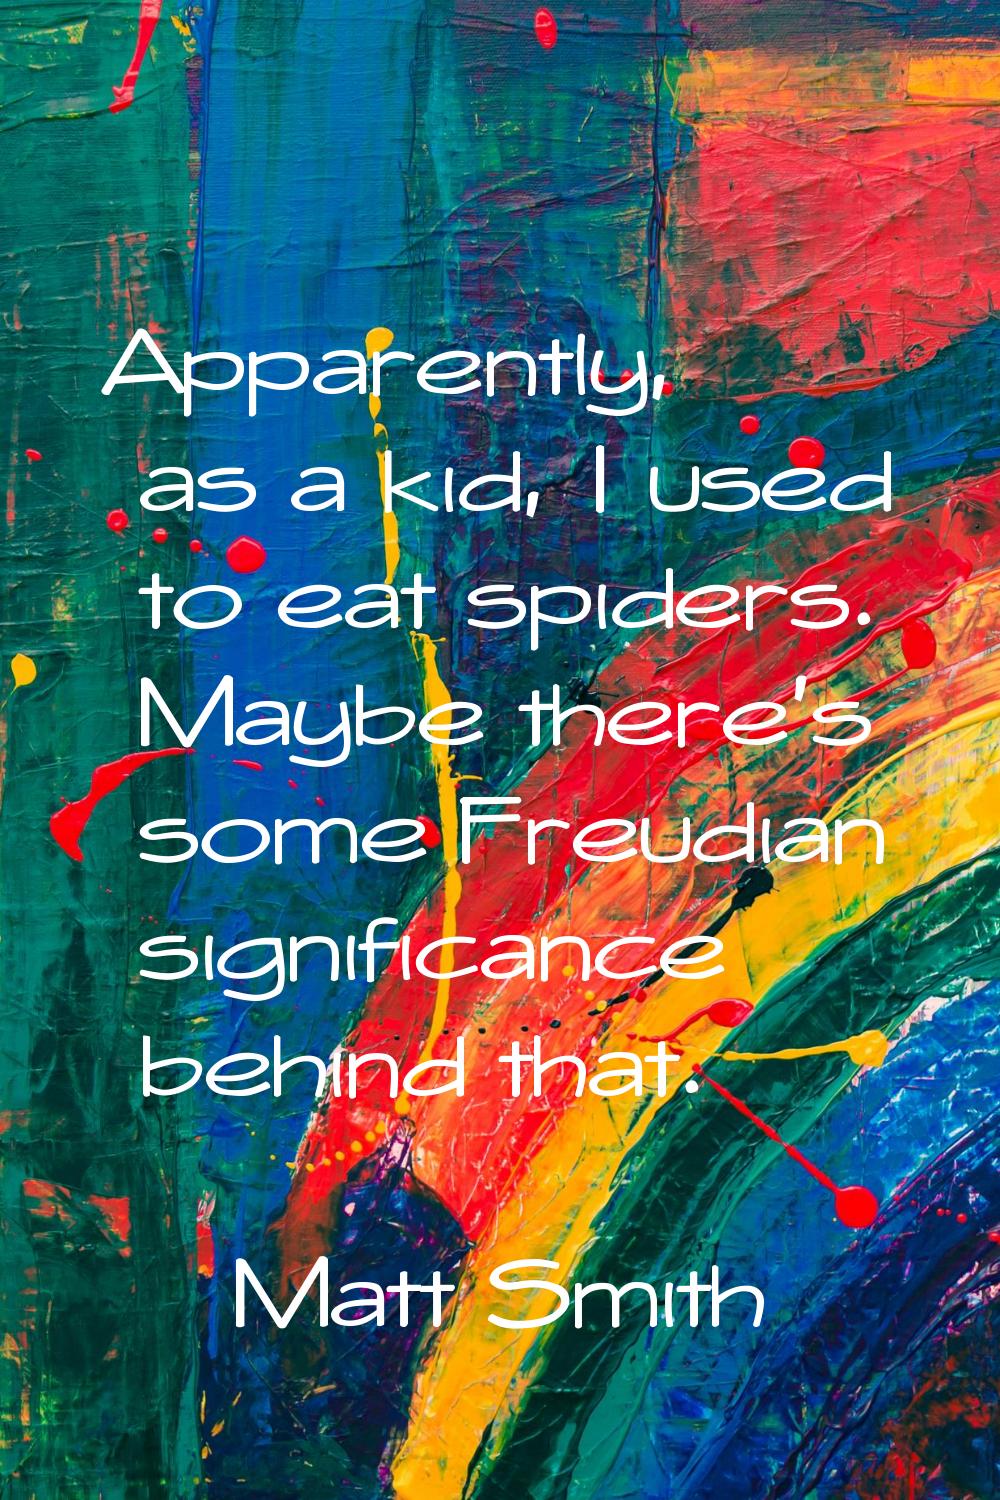 Apparently, as a kid, I used to eat spiders. Maybe there's some Freudian significance behind that.